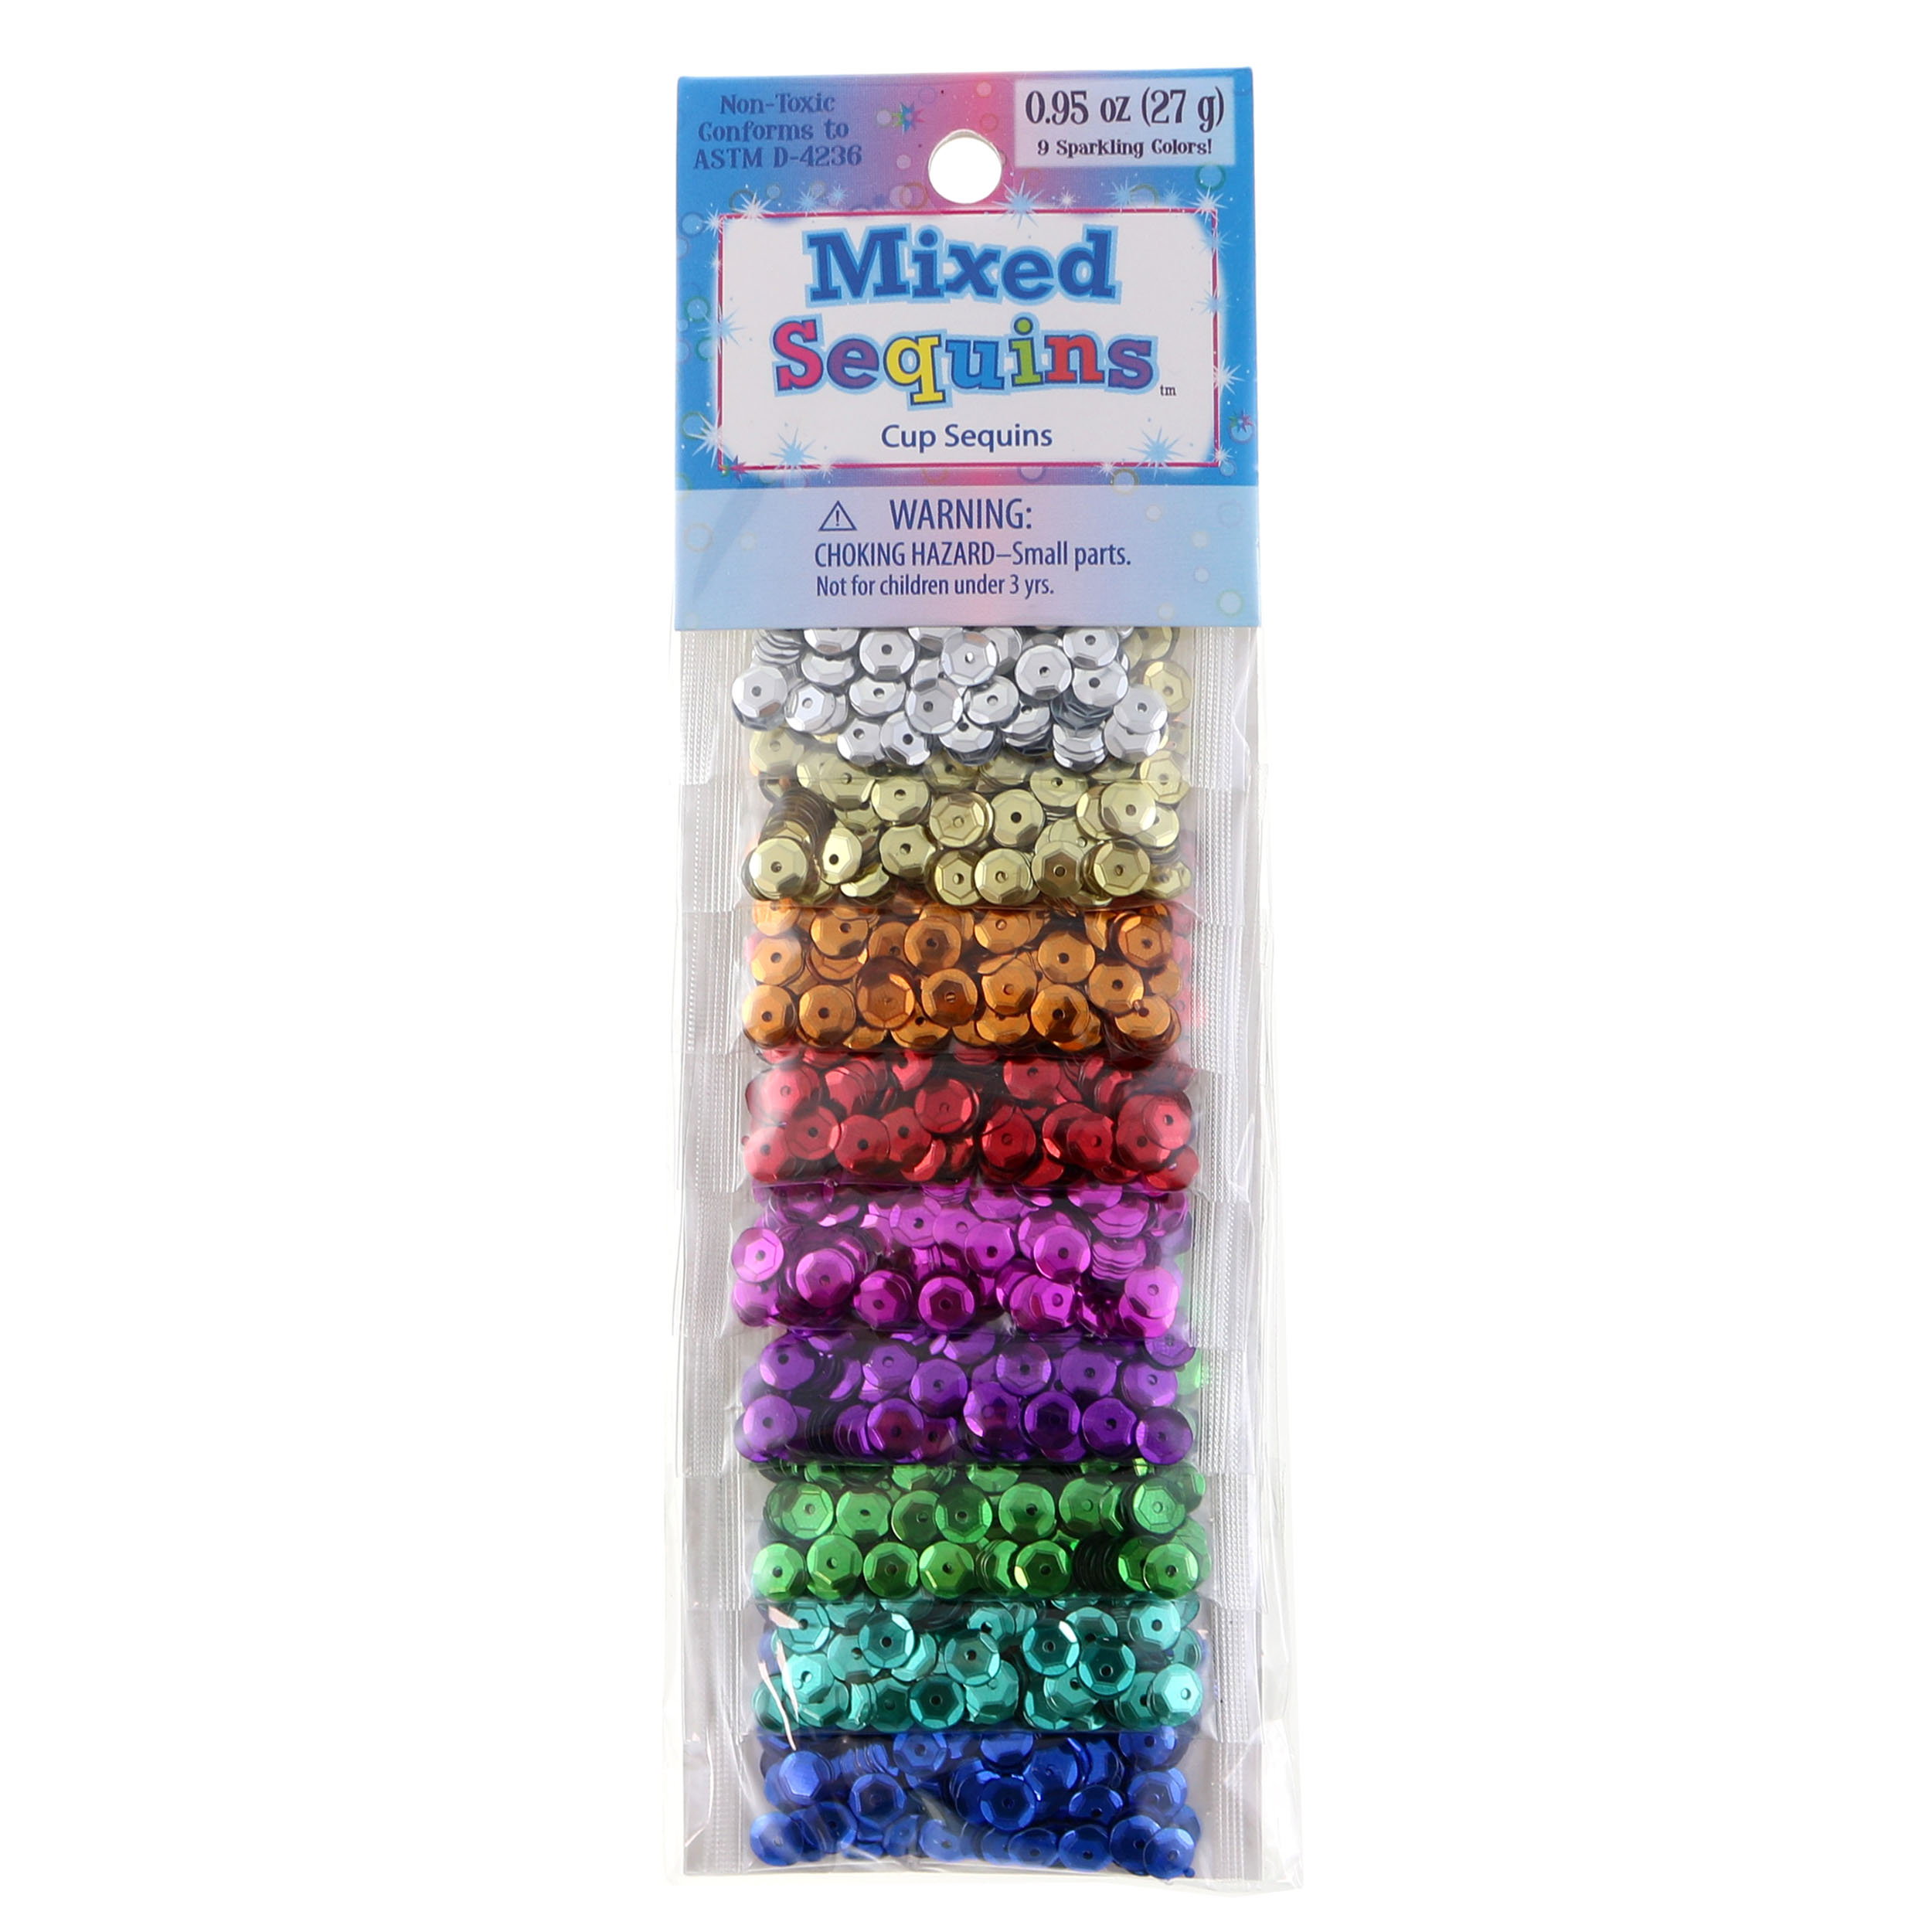 Sulyn Assorted Cups of Mixed Sequins, 9 pack - image 1 of 2